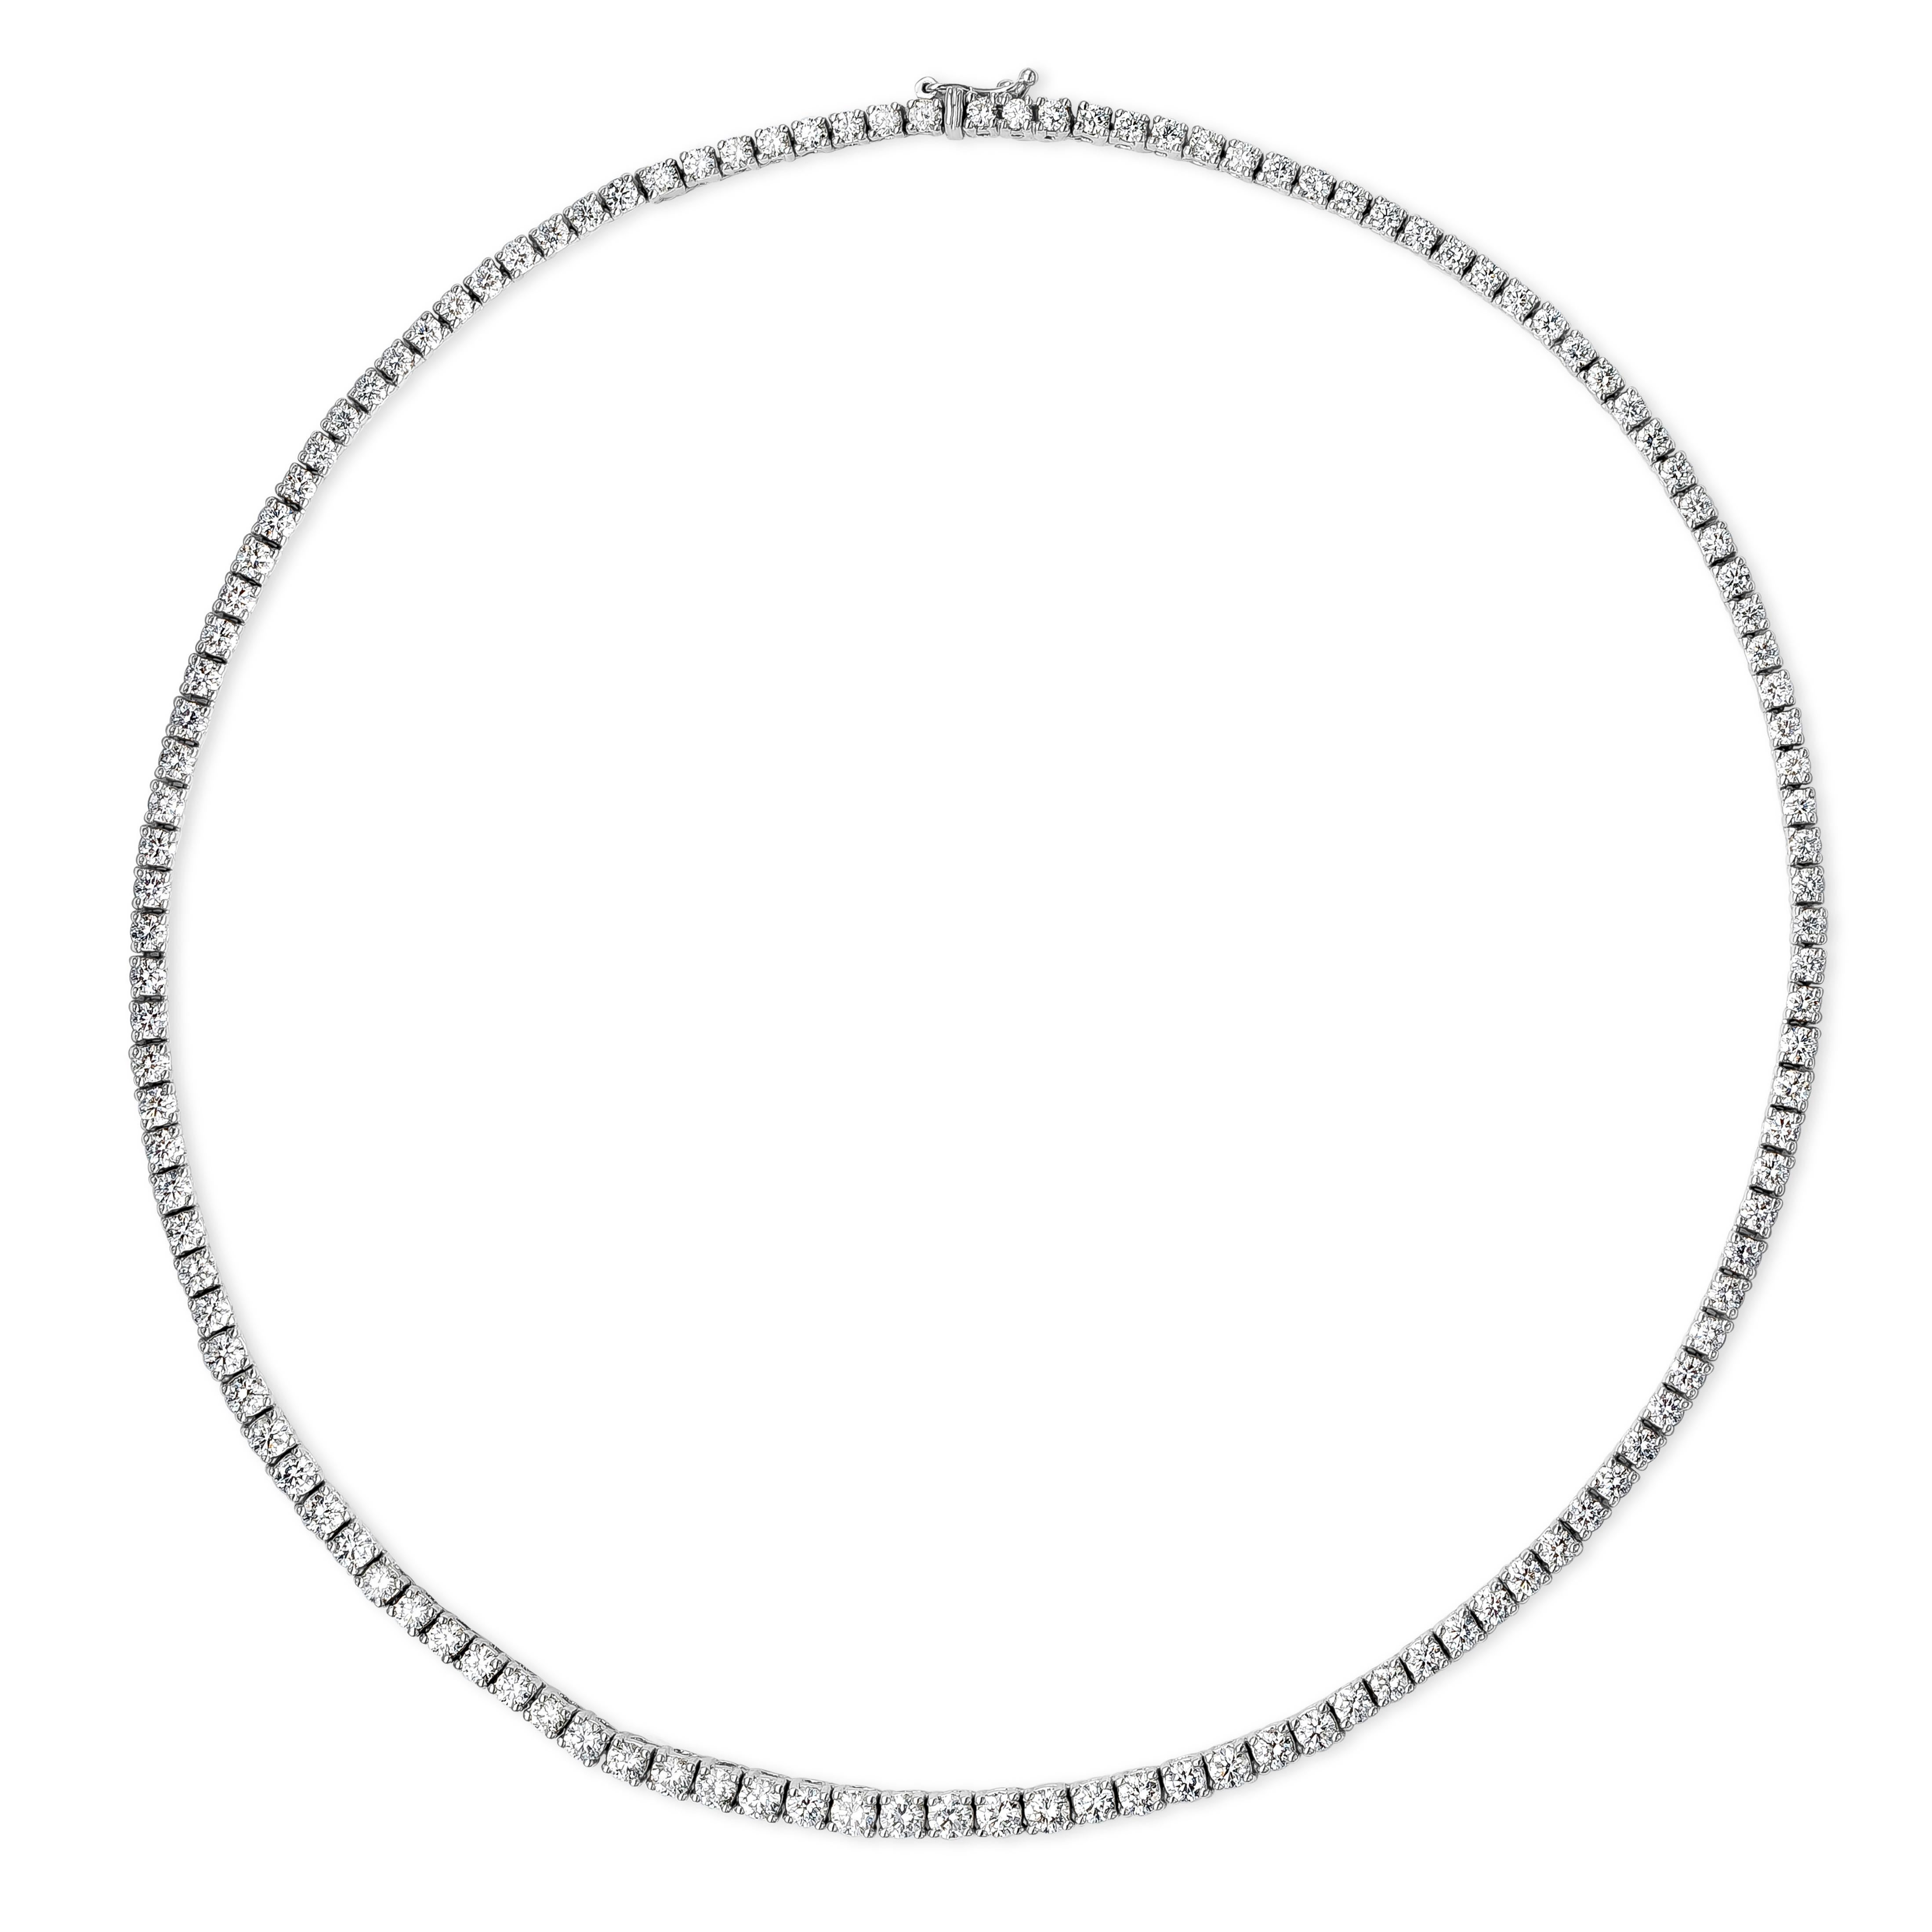 Contemporary Roman Malakov 9.41 Carat Total Round Diamond Tennis Necklace in White Gold For Sale